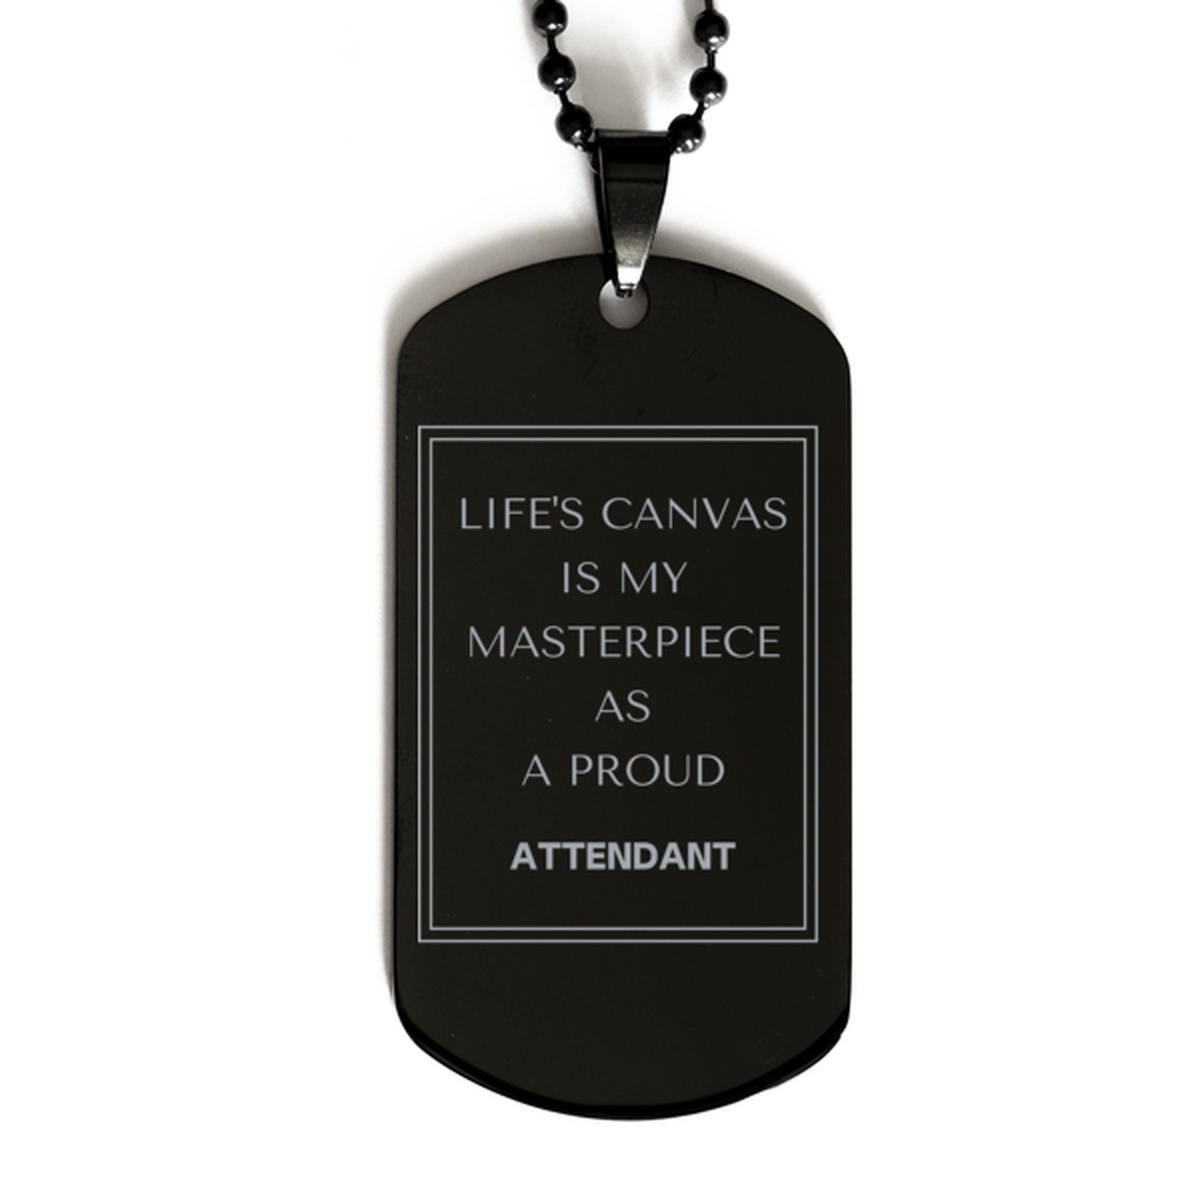 Proud Attendant Gifts, Life's canvas is my masterpiece, Epic Birthday Christmas Unique Black Dog Tag For Attendant, Coworkers, Men, Women, Friends